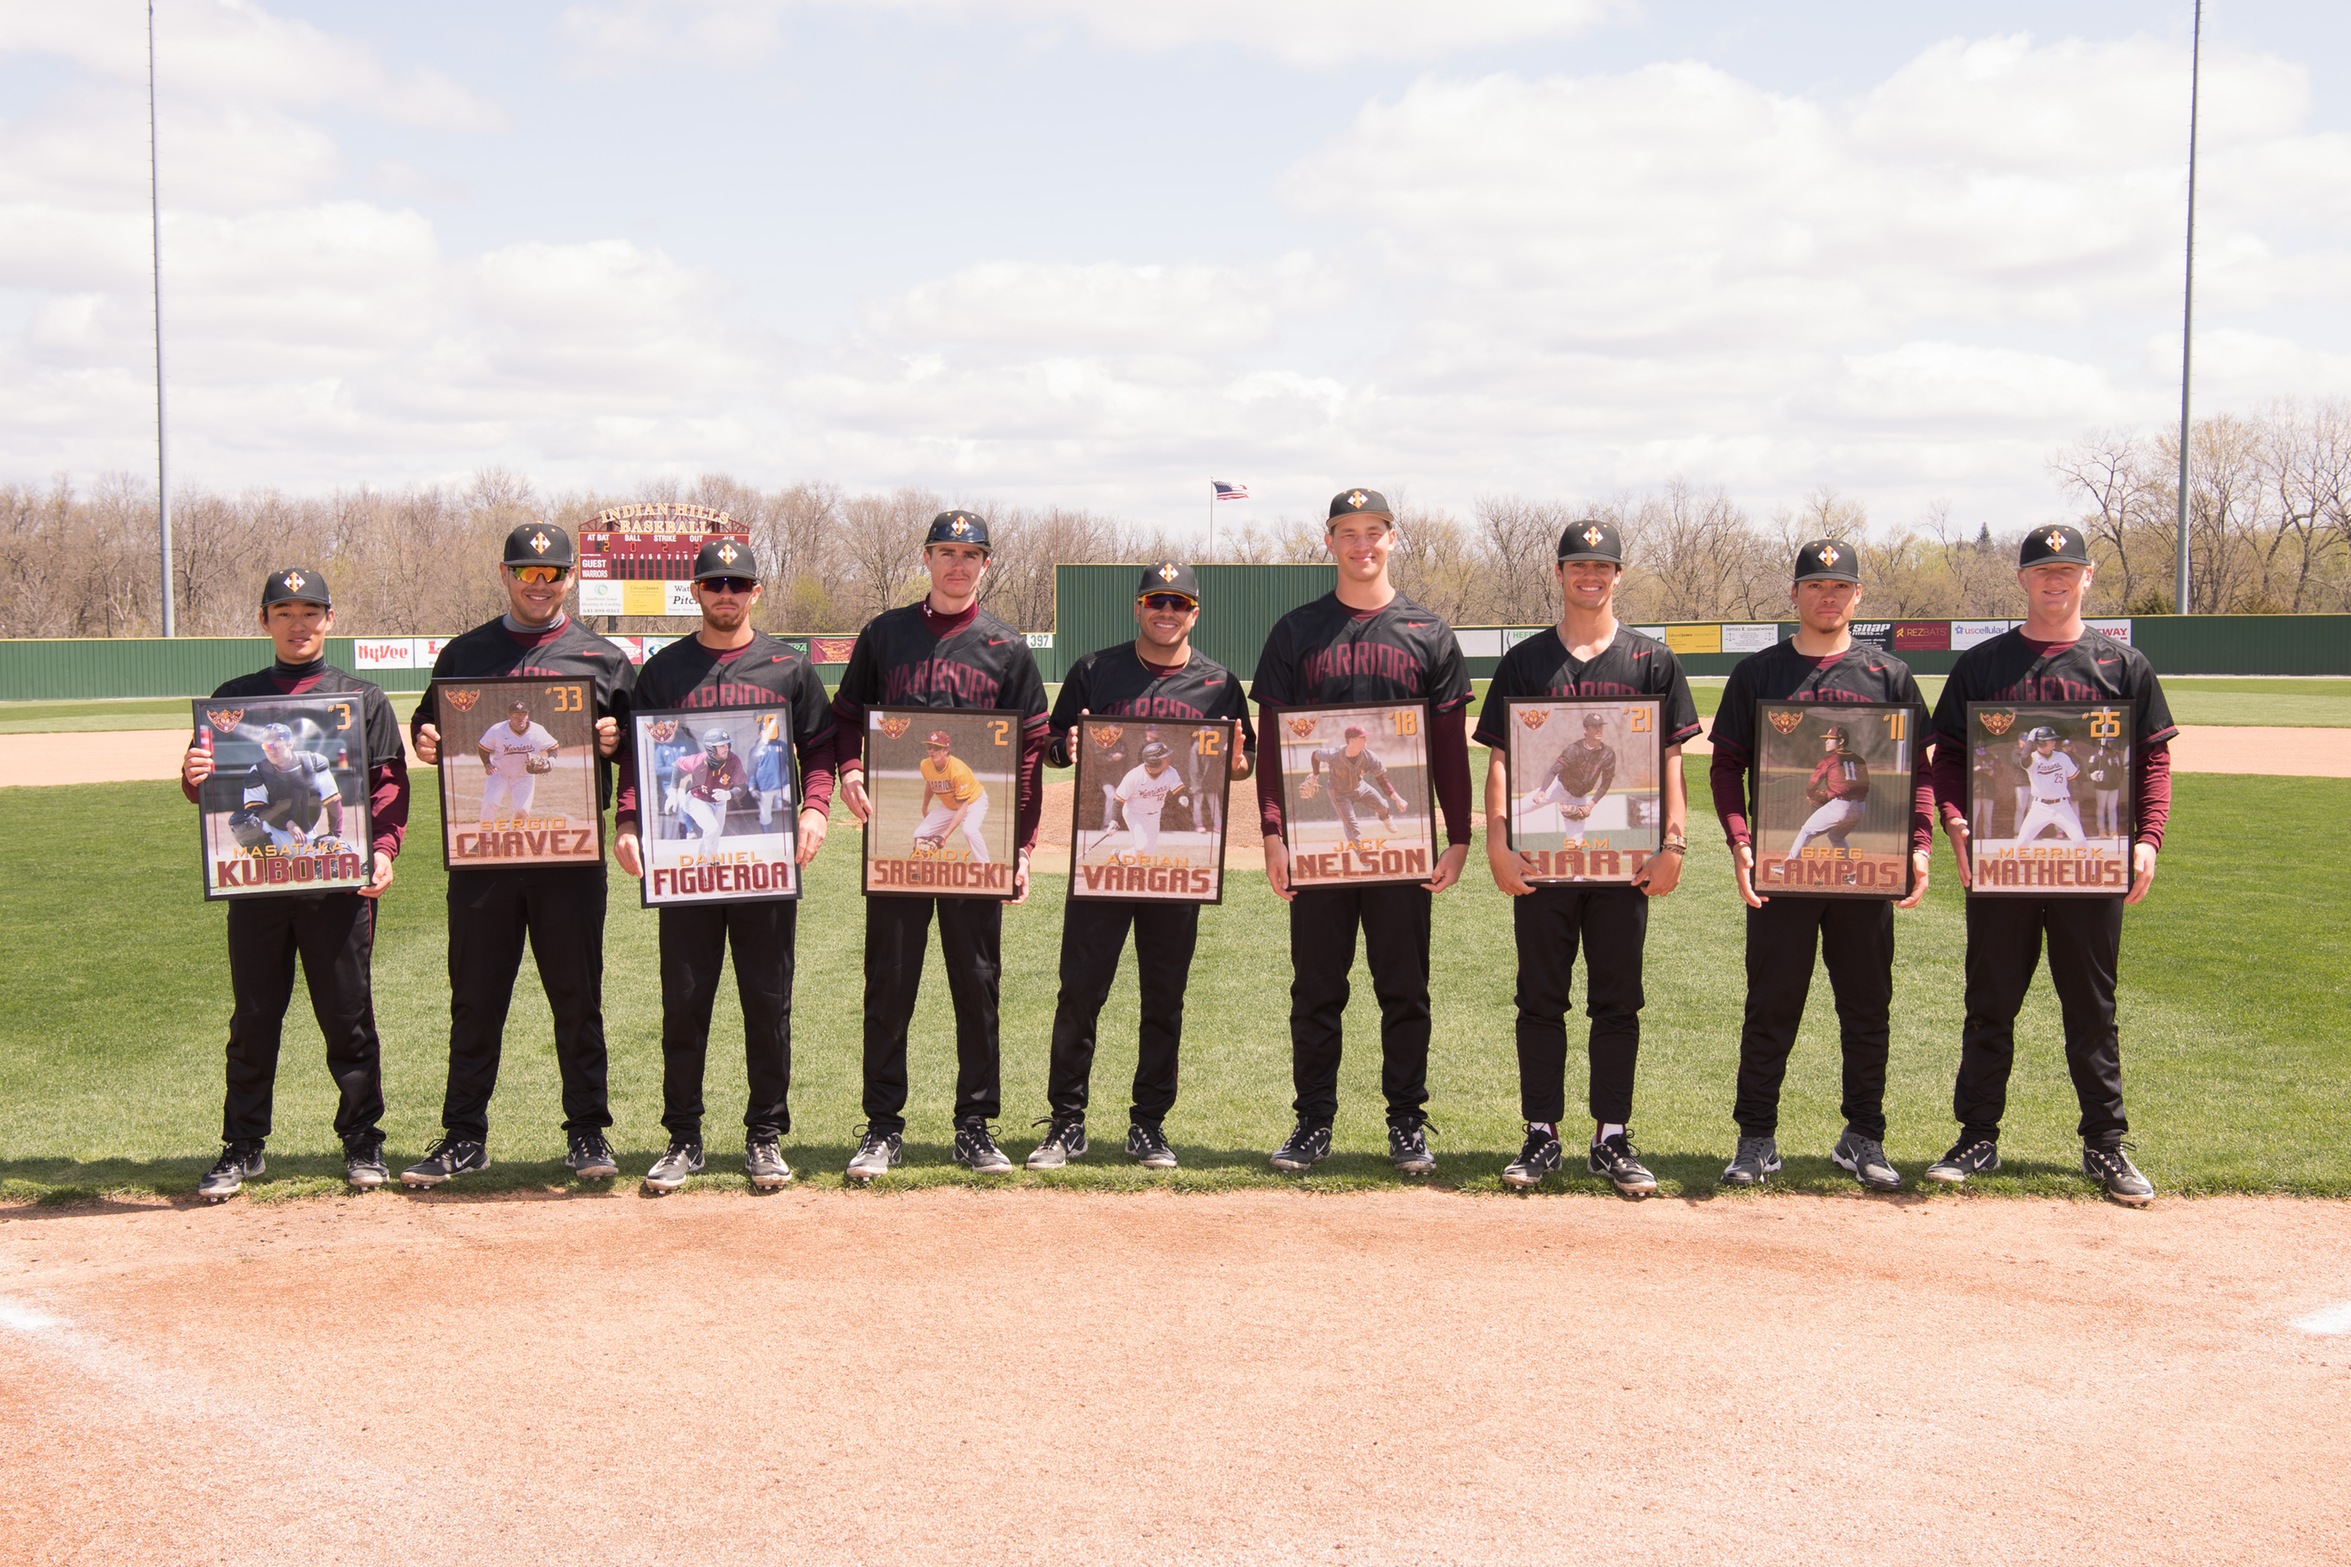 WARRIORS SWEEP SPARTANS ON SOPHOMORE DAY